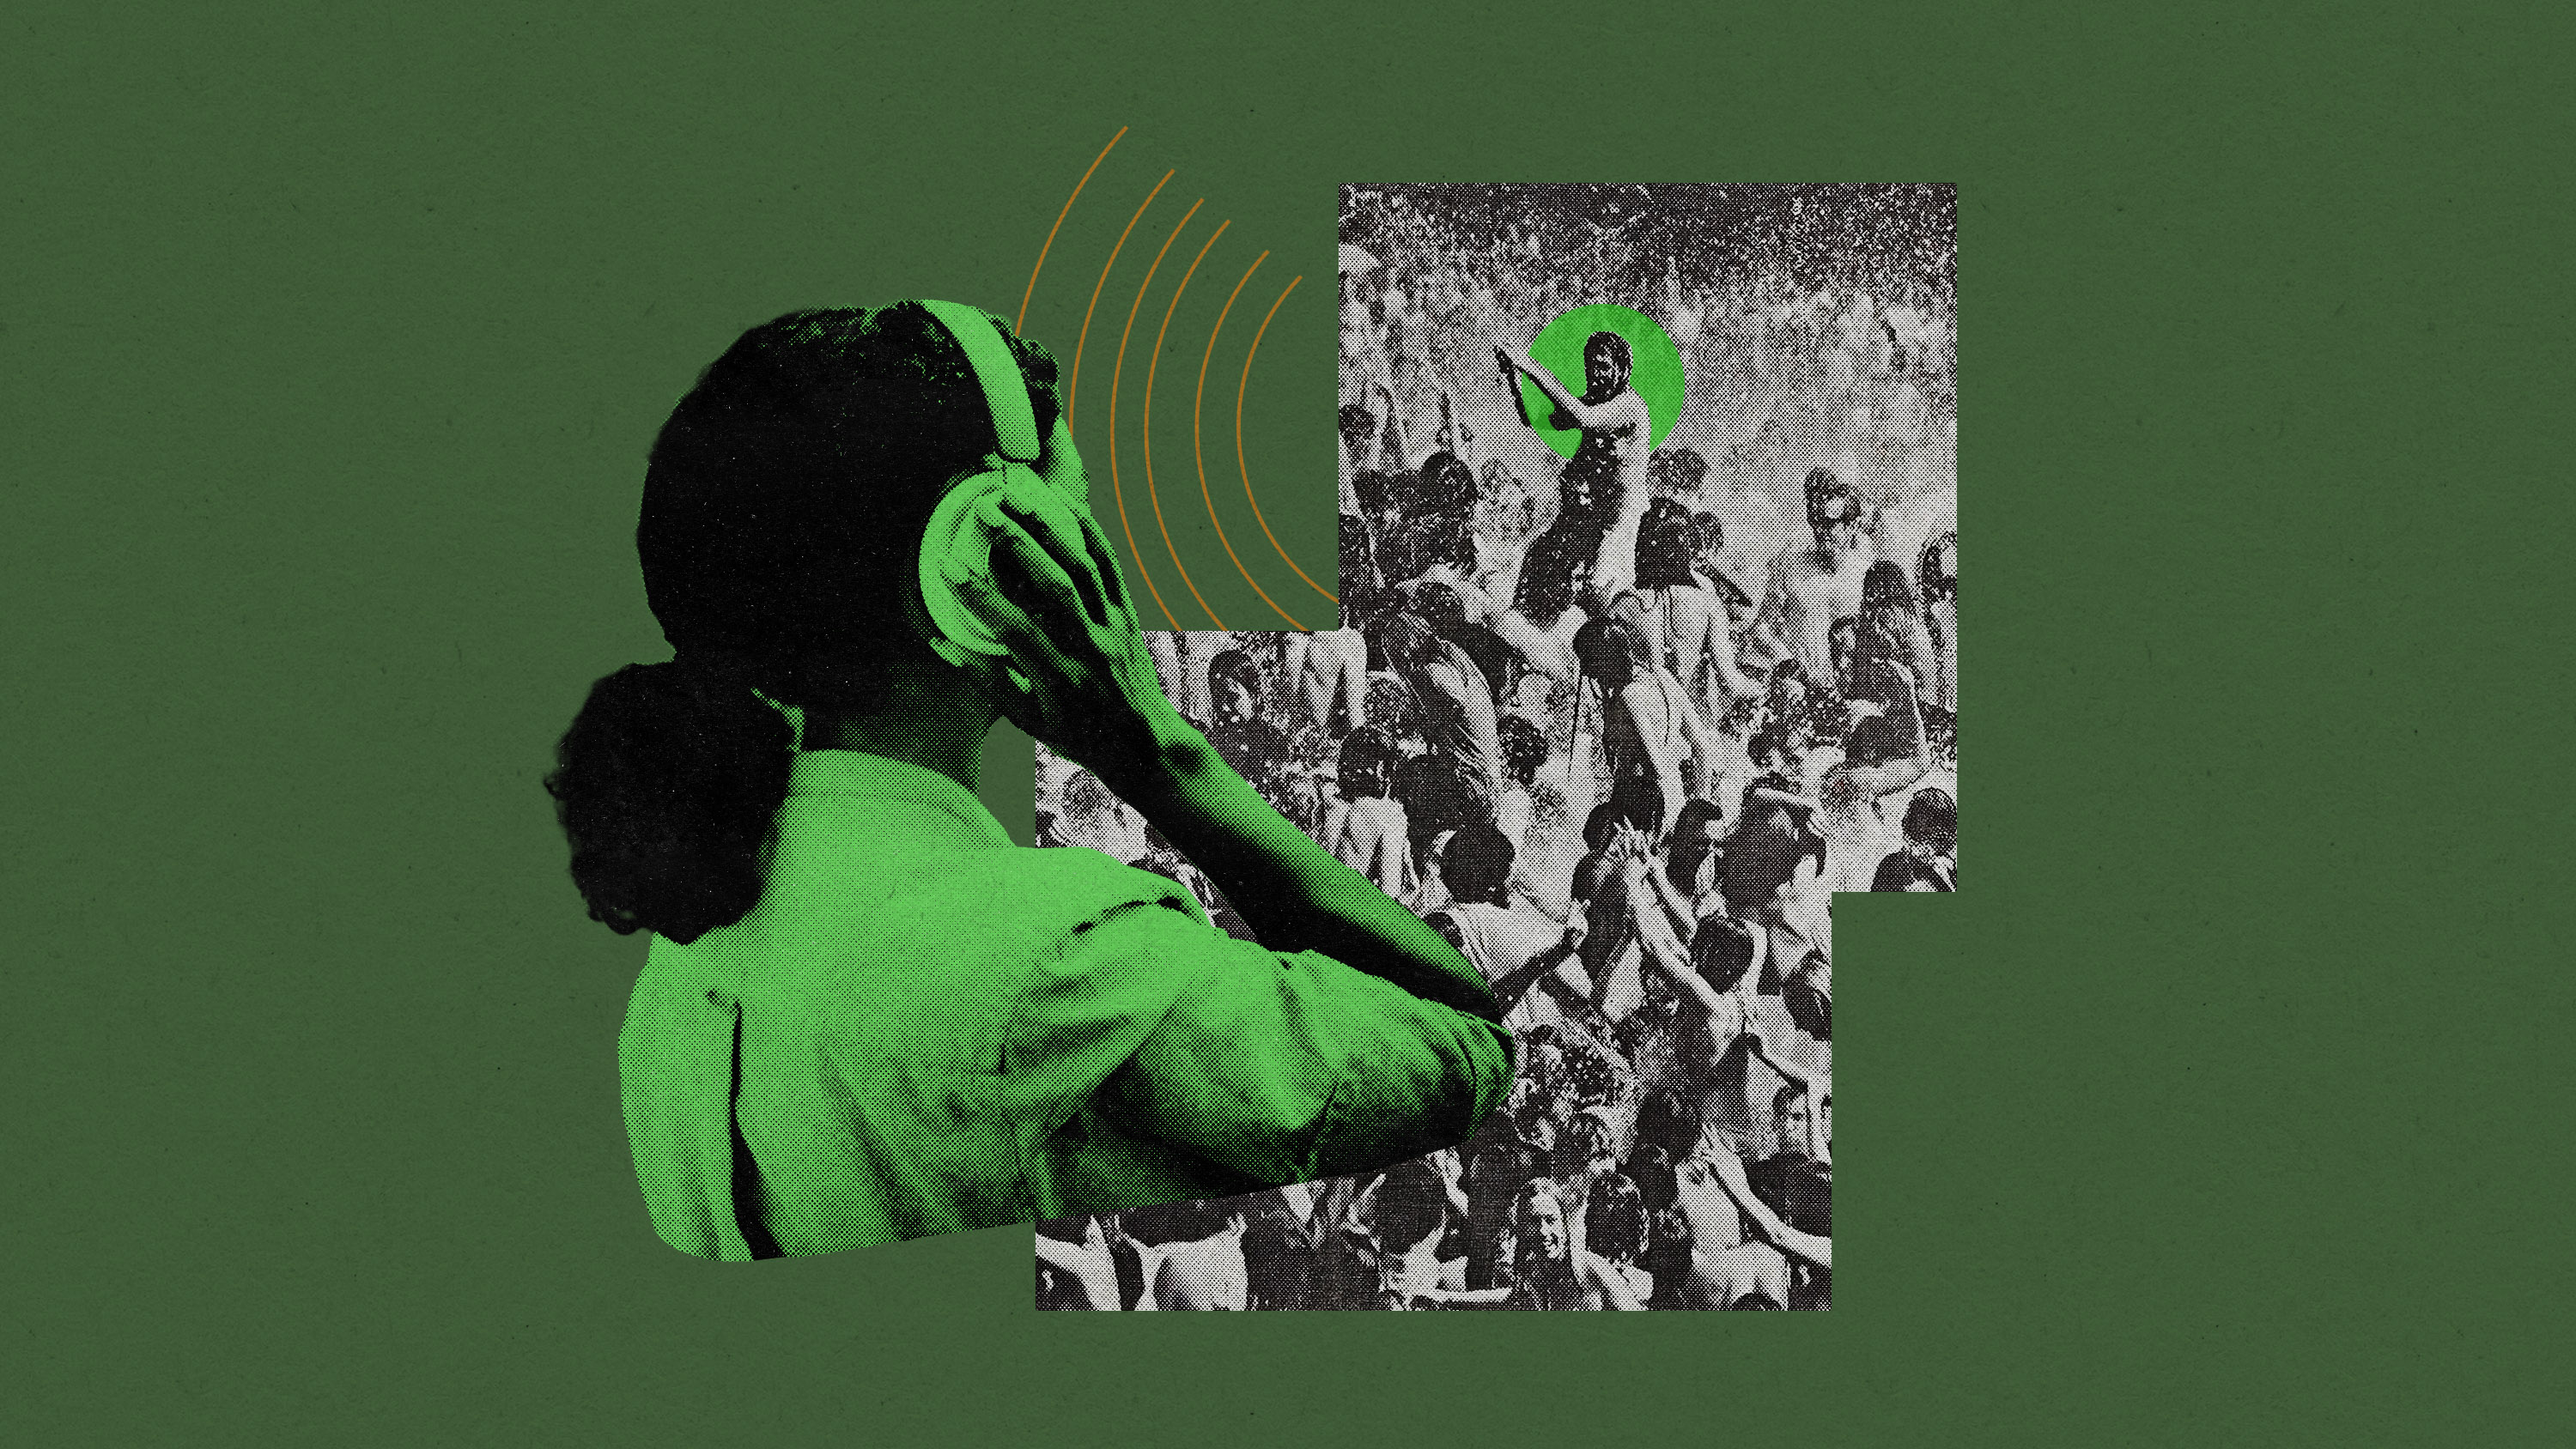 person in headphones perceives a person highlighted with a green circle across a crowd of people at Woodstock